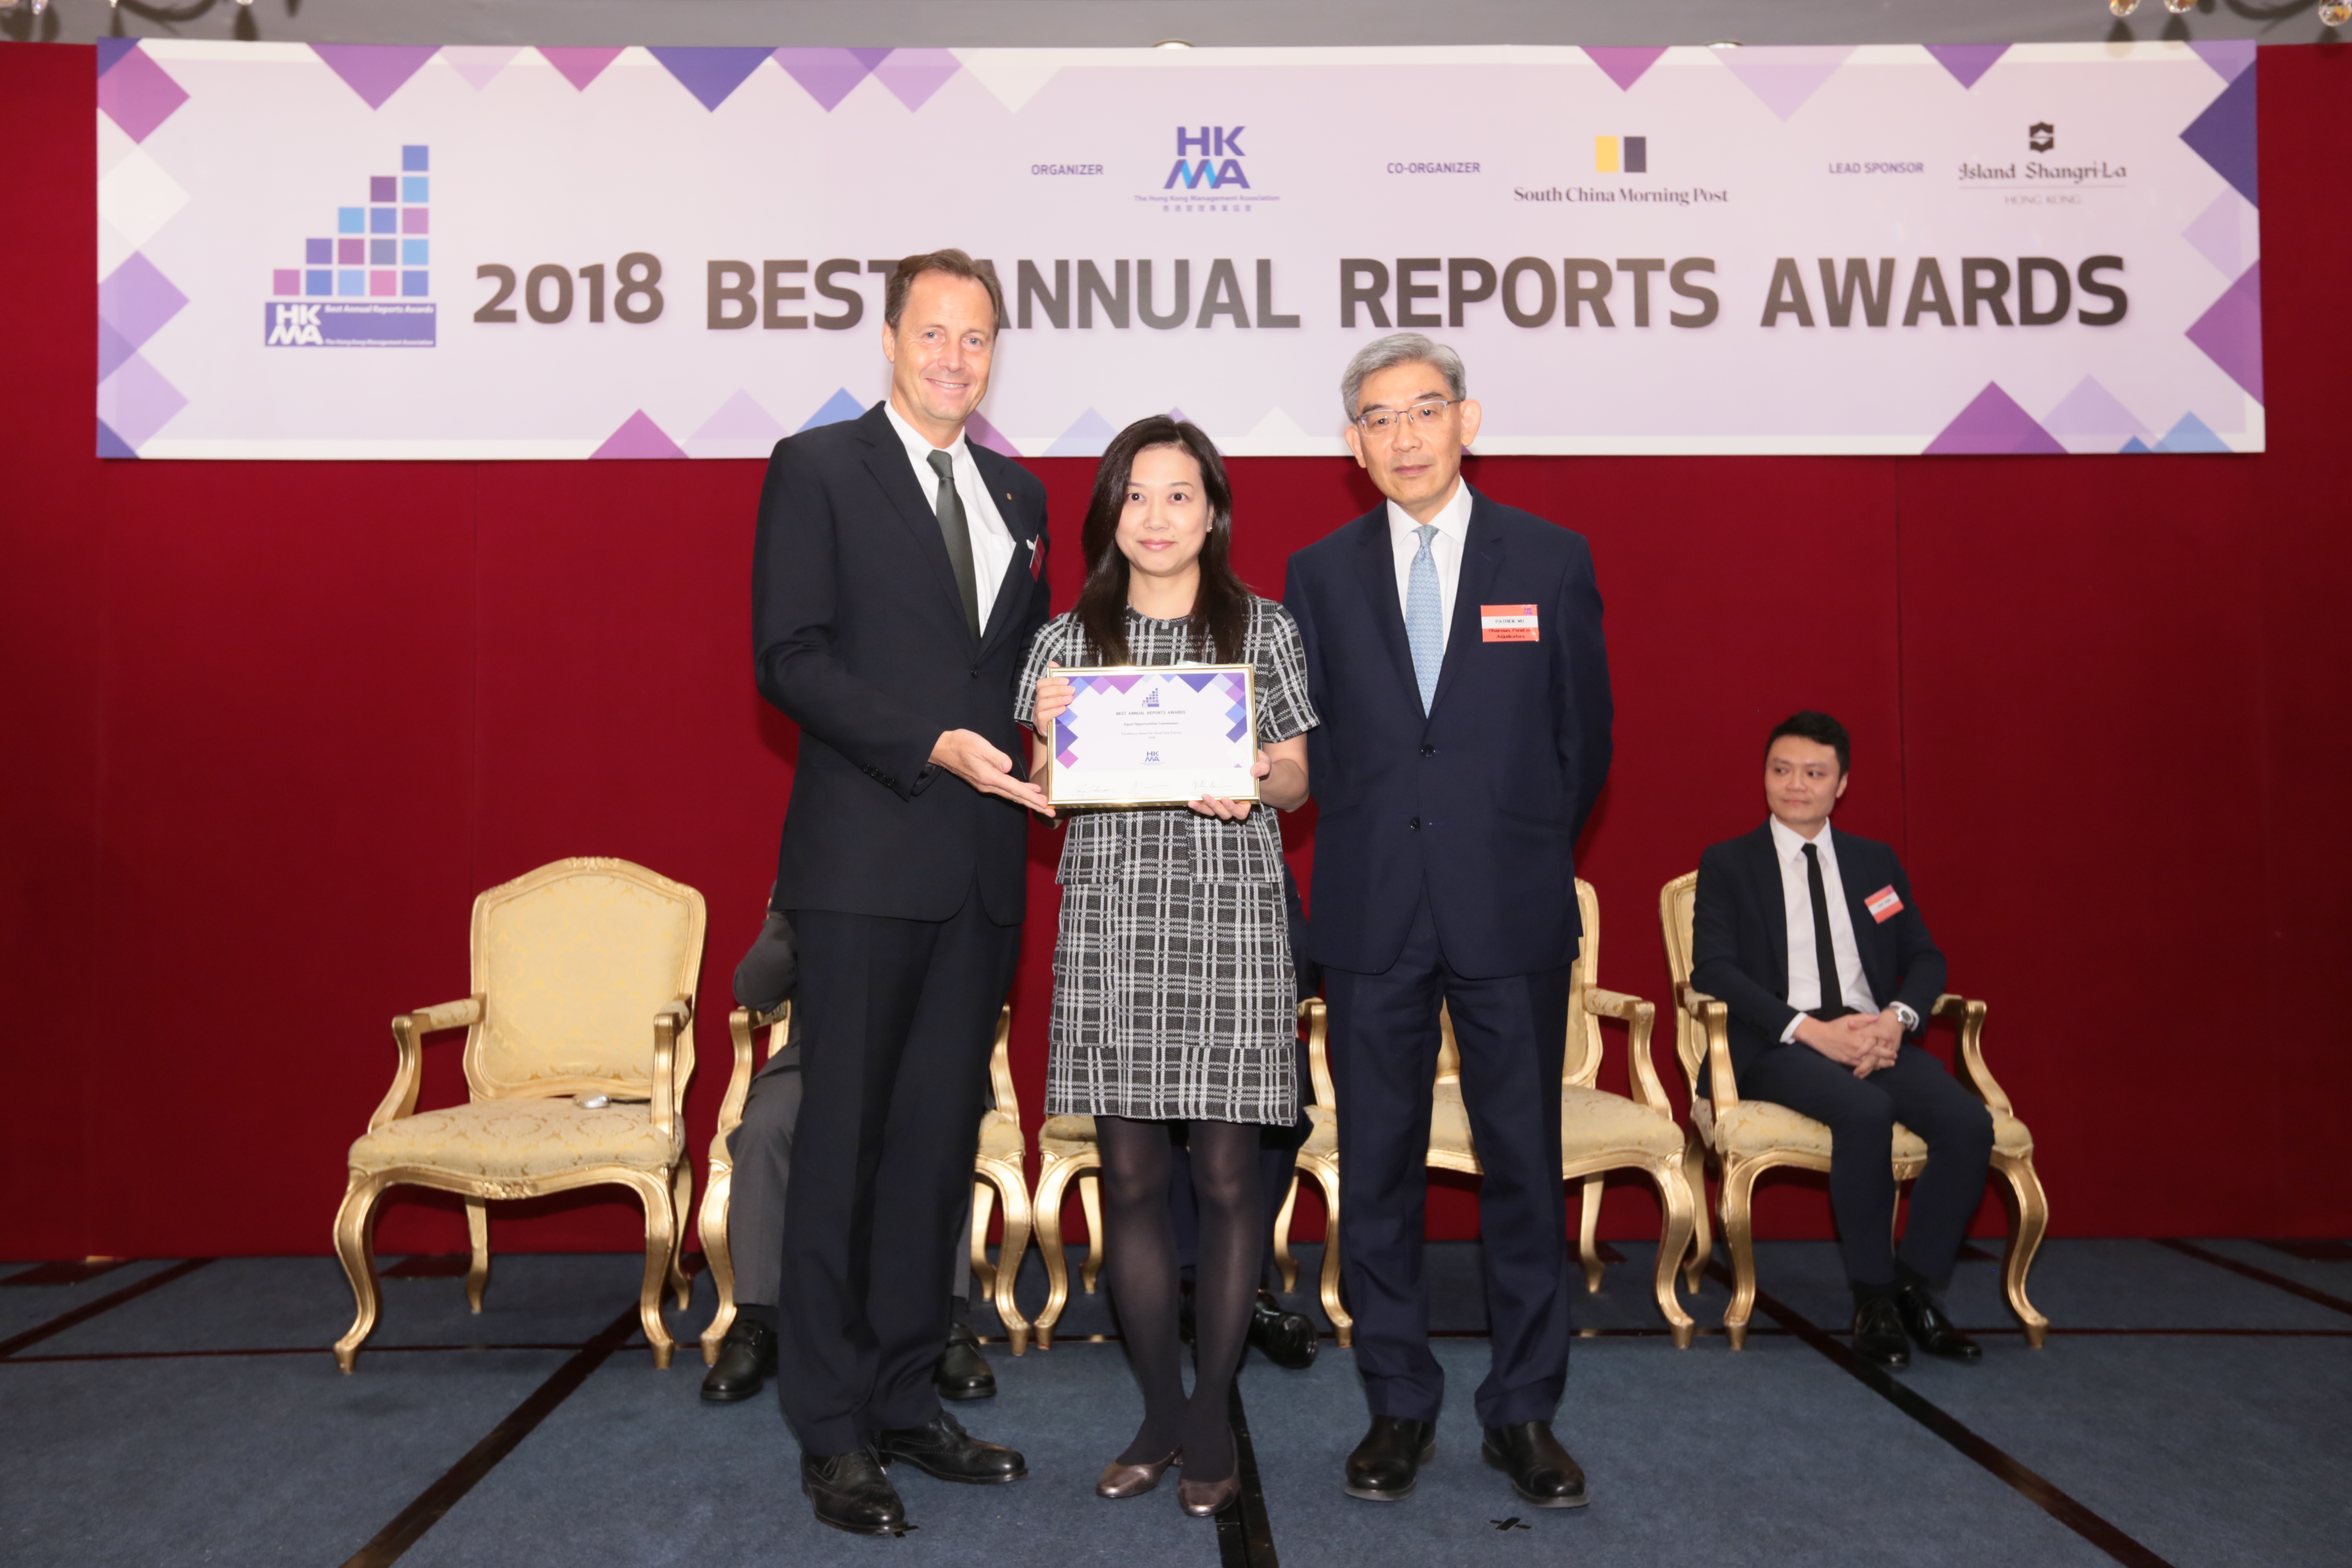 EOC Annual Report 2016/17 receives Excellence Award from HKMA